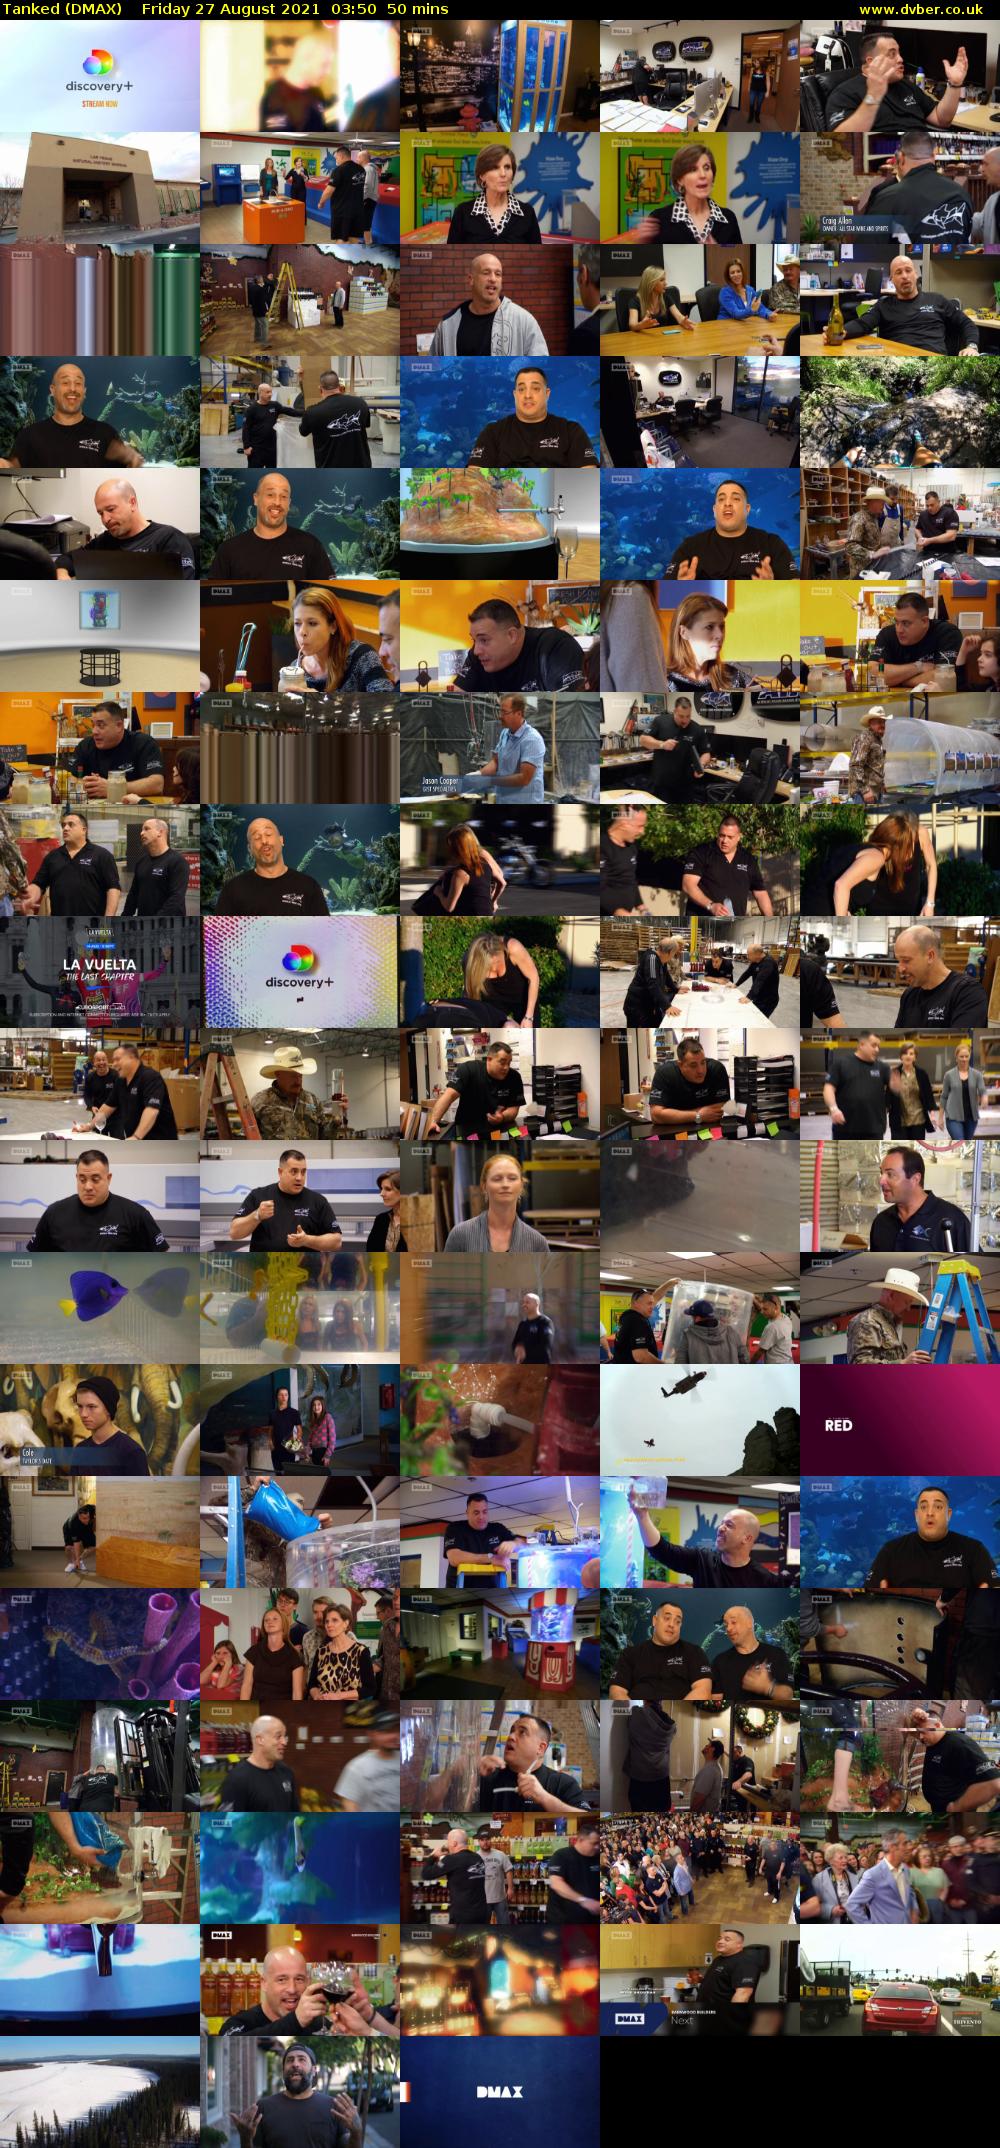 Tanked (DMAX) Friday 27 August 2021 03:50 - 04:40